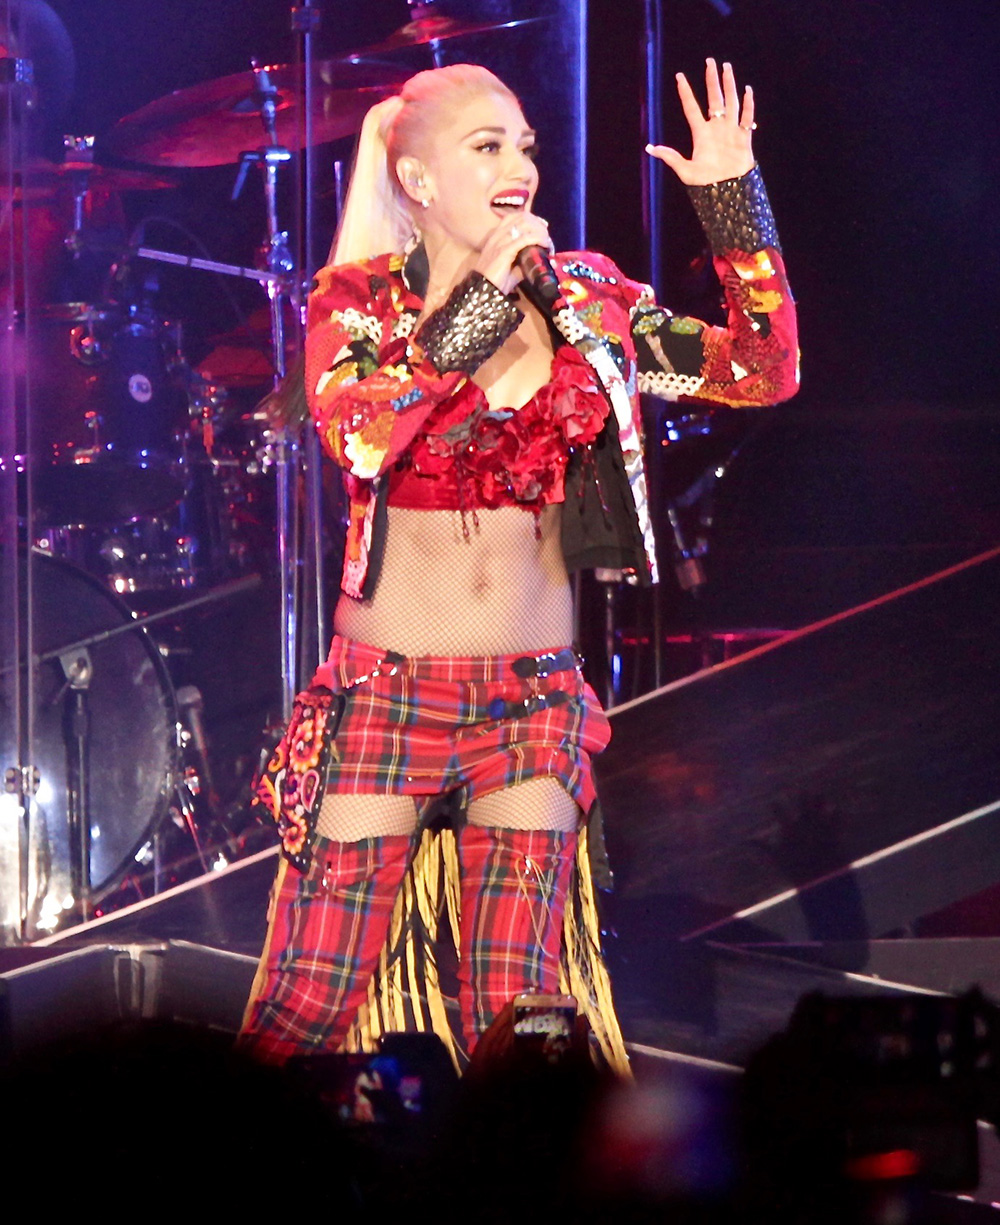 PHOTOS: Gwen Stefani at The Forum in Los Angeles, CA